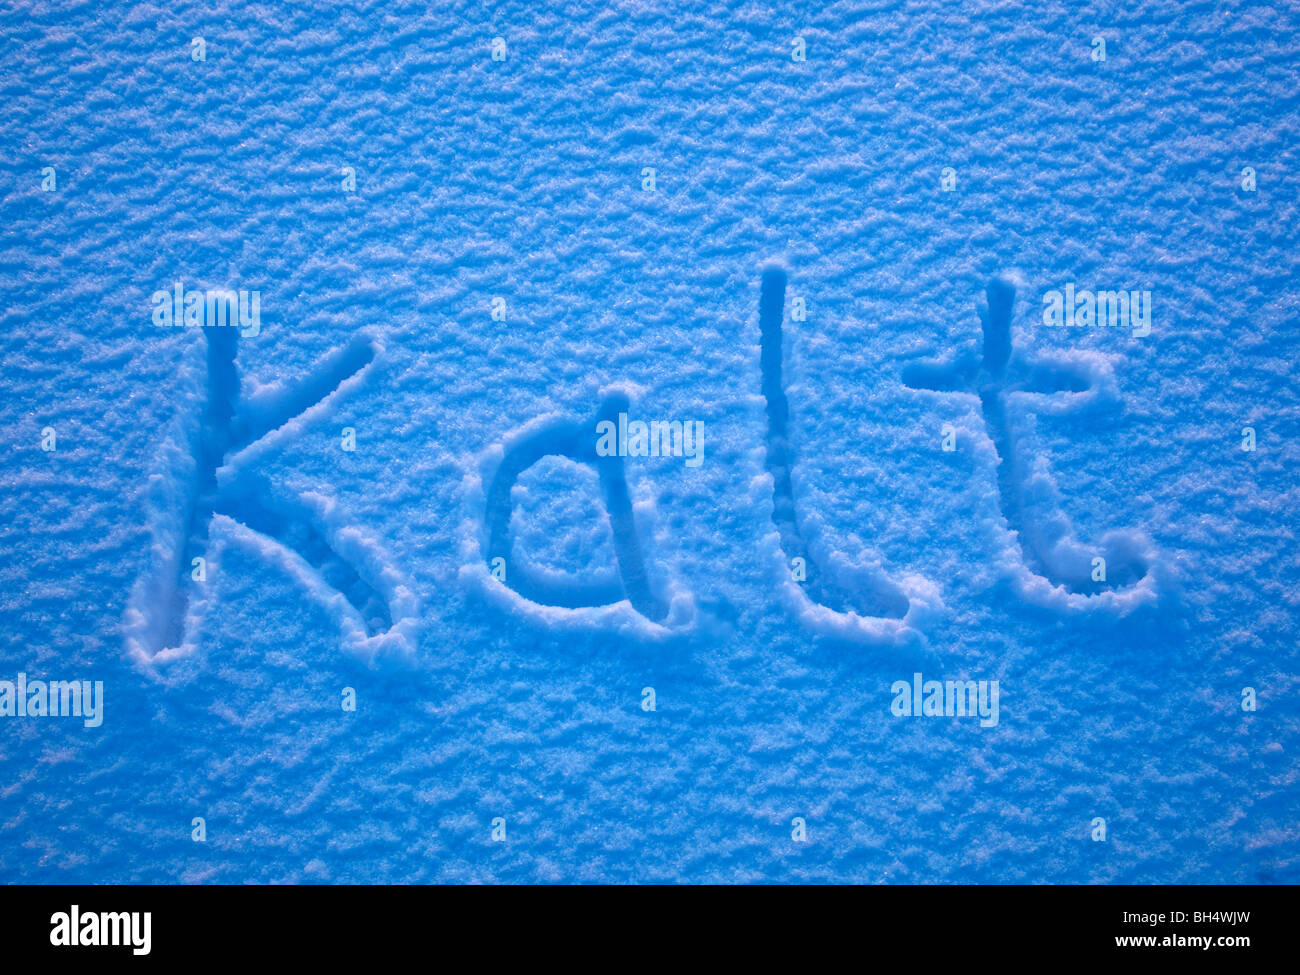 The German word for cold - Kalt - spelled out in the snow. Stock Photo